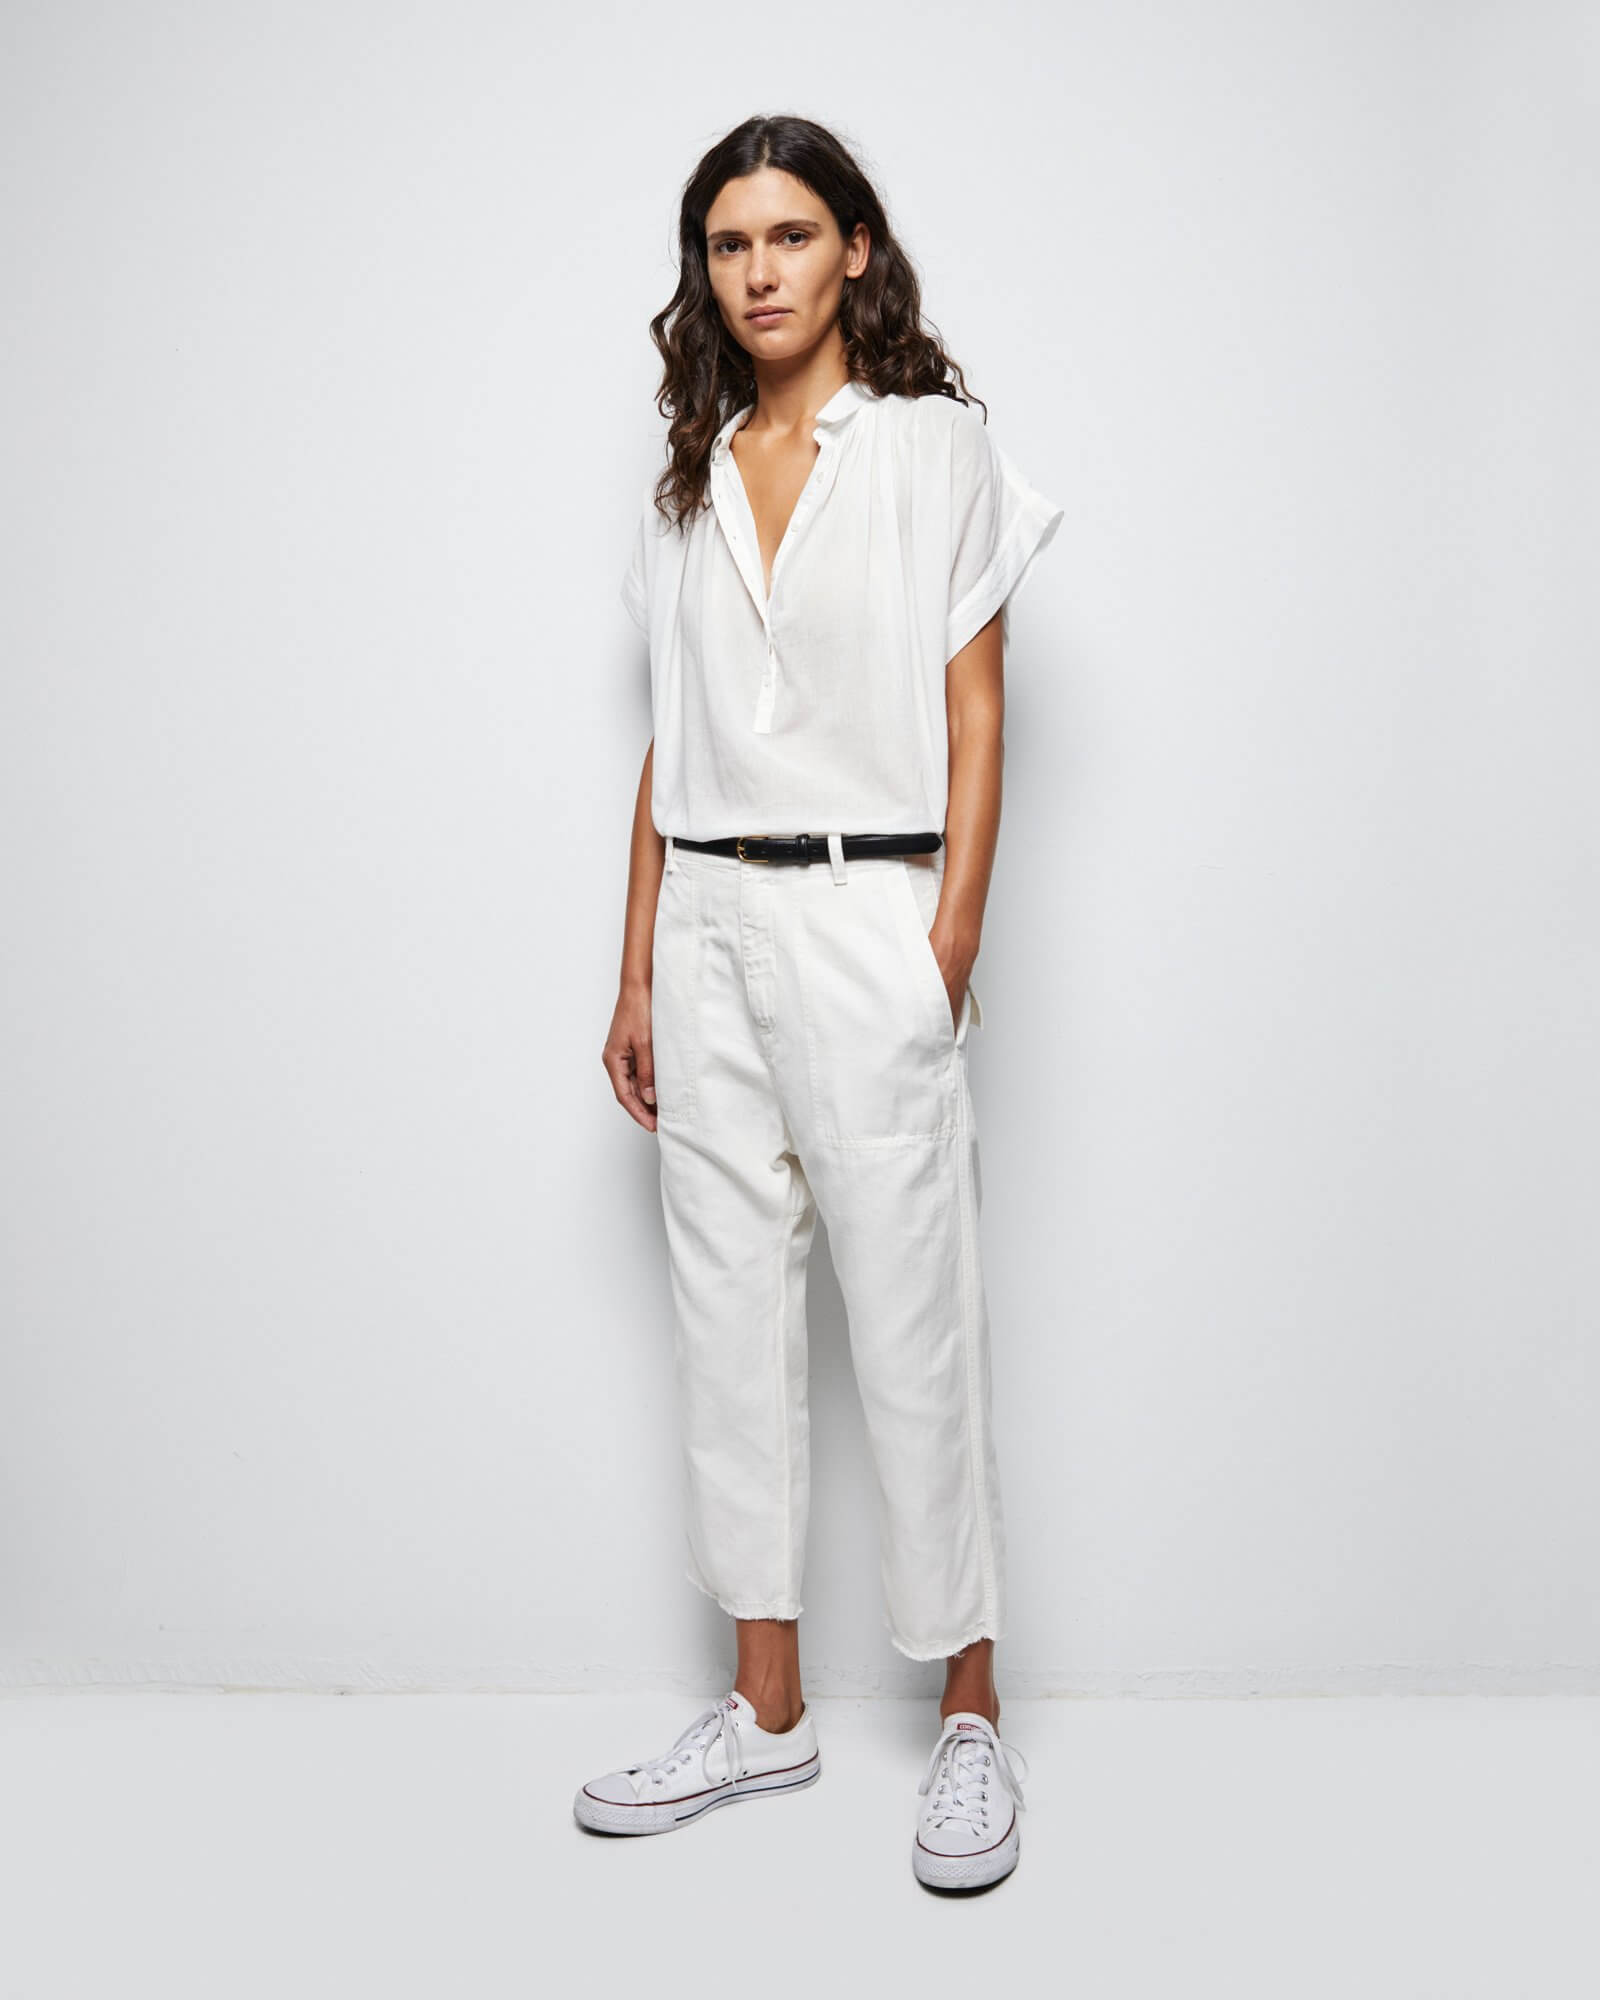 Nili Lotan Normandy Blouse in Ivory from The New Trend